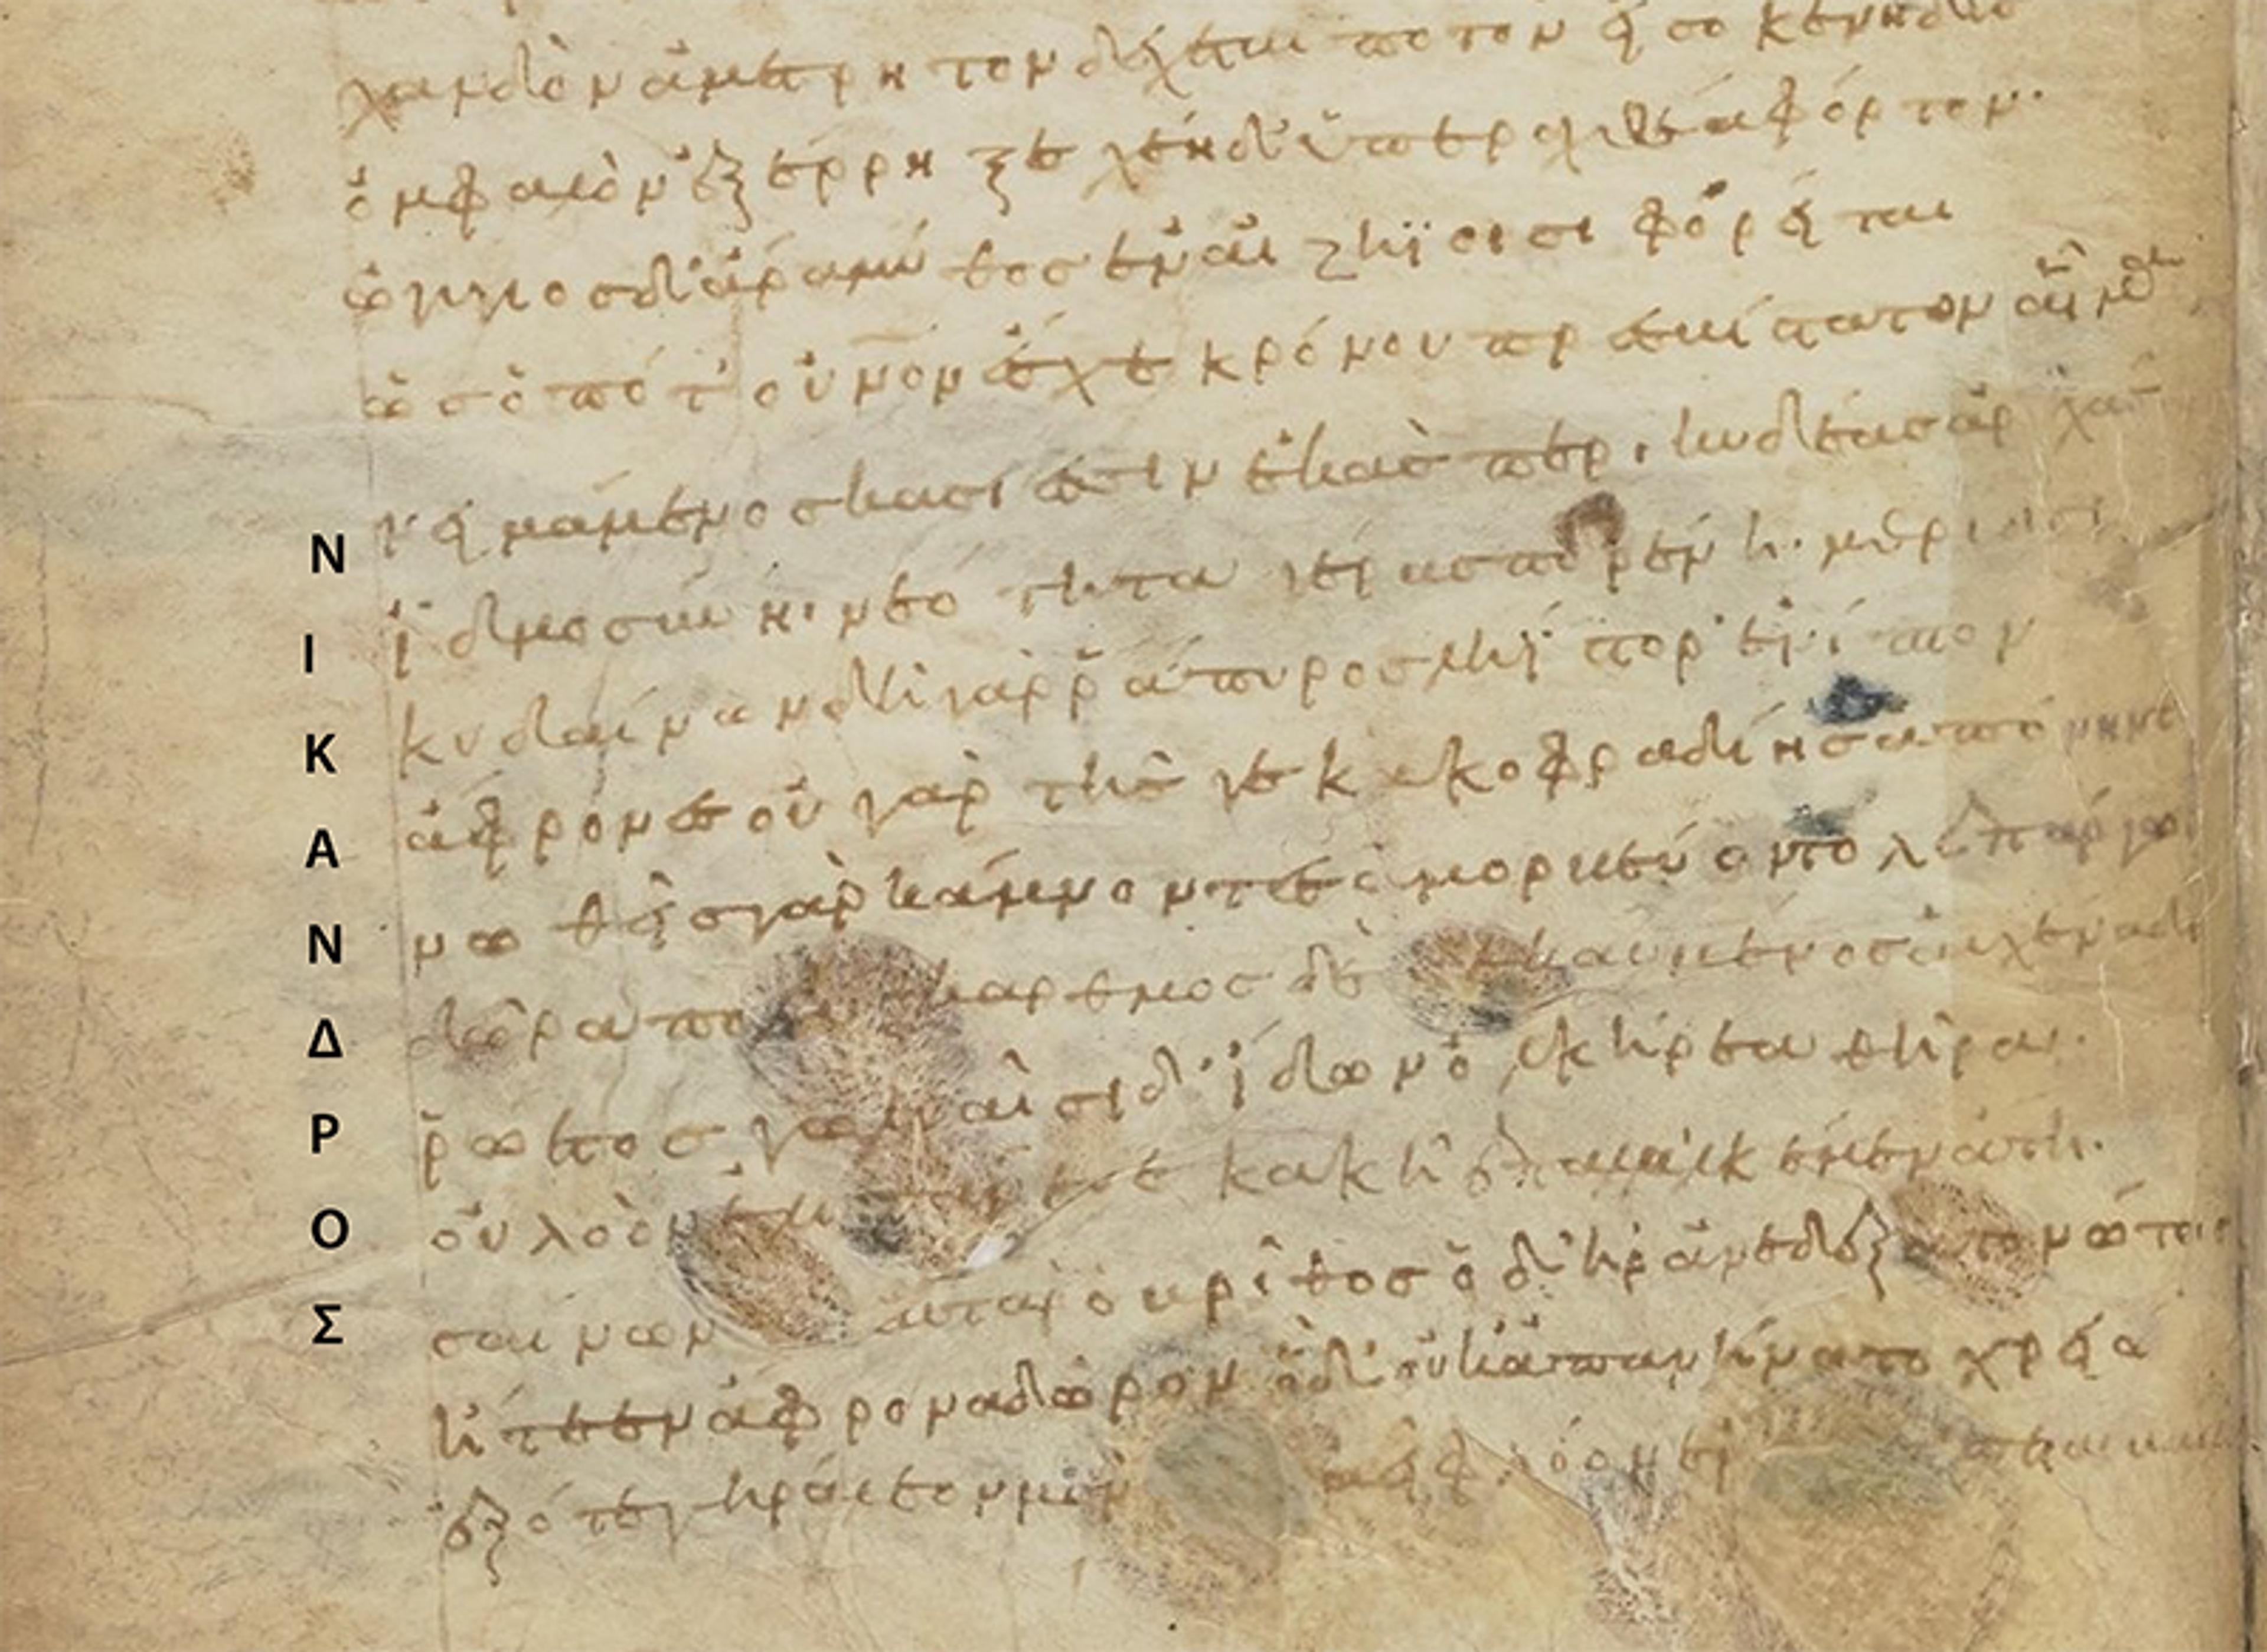 A section of a manuscript of Nicander's Theriaca poem dating from the 11th century shows his acrostic signature N, I, C, etc running vertically, each letter beginning a line